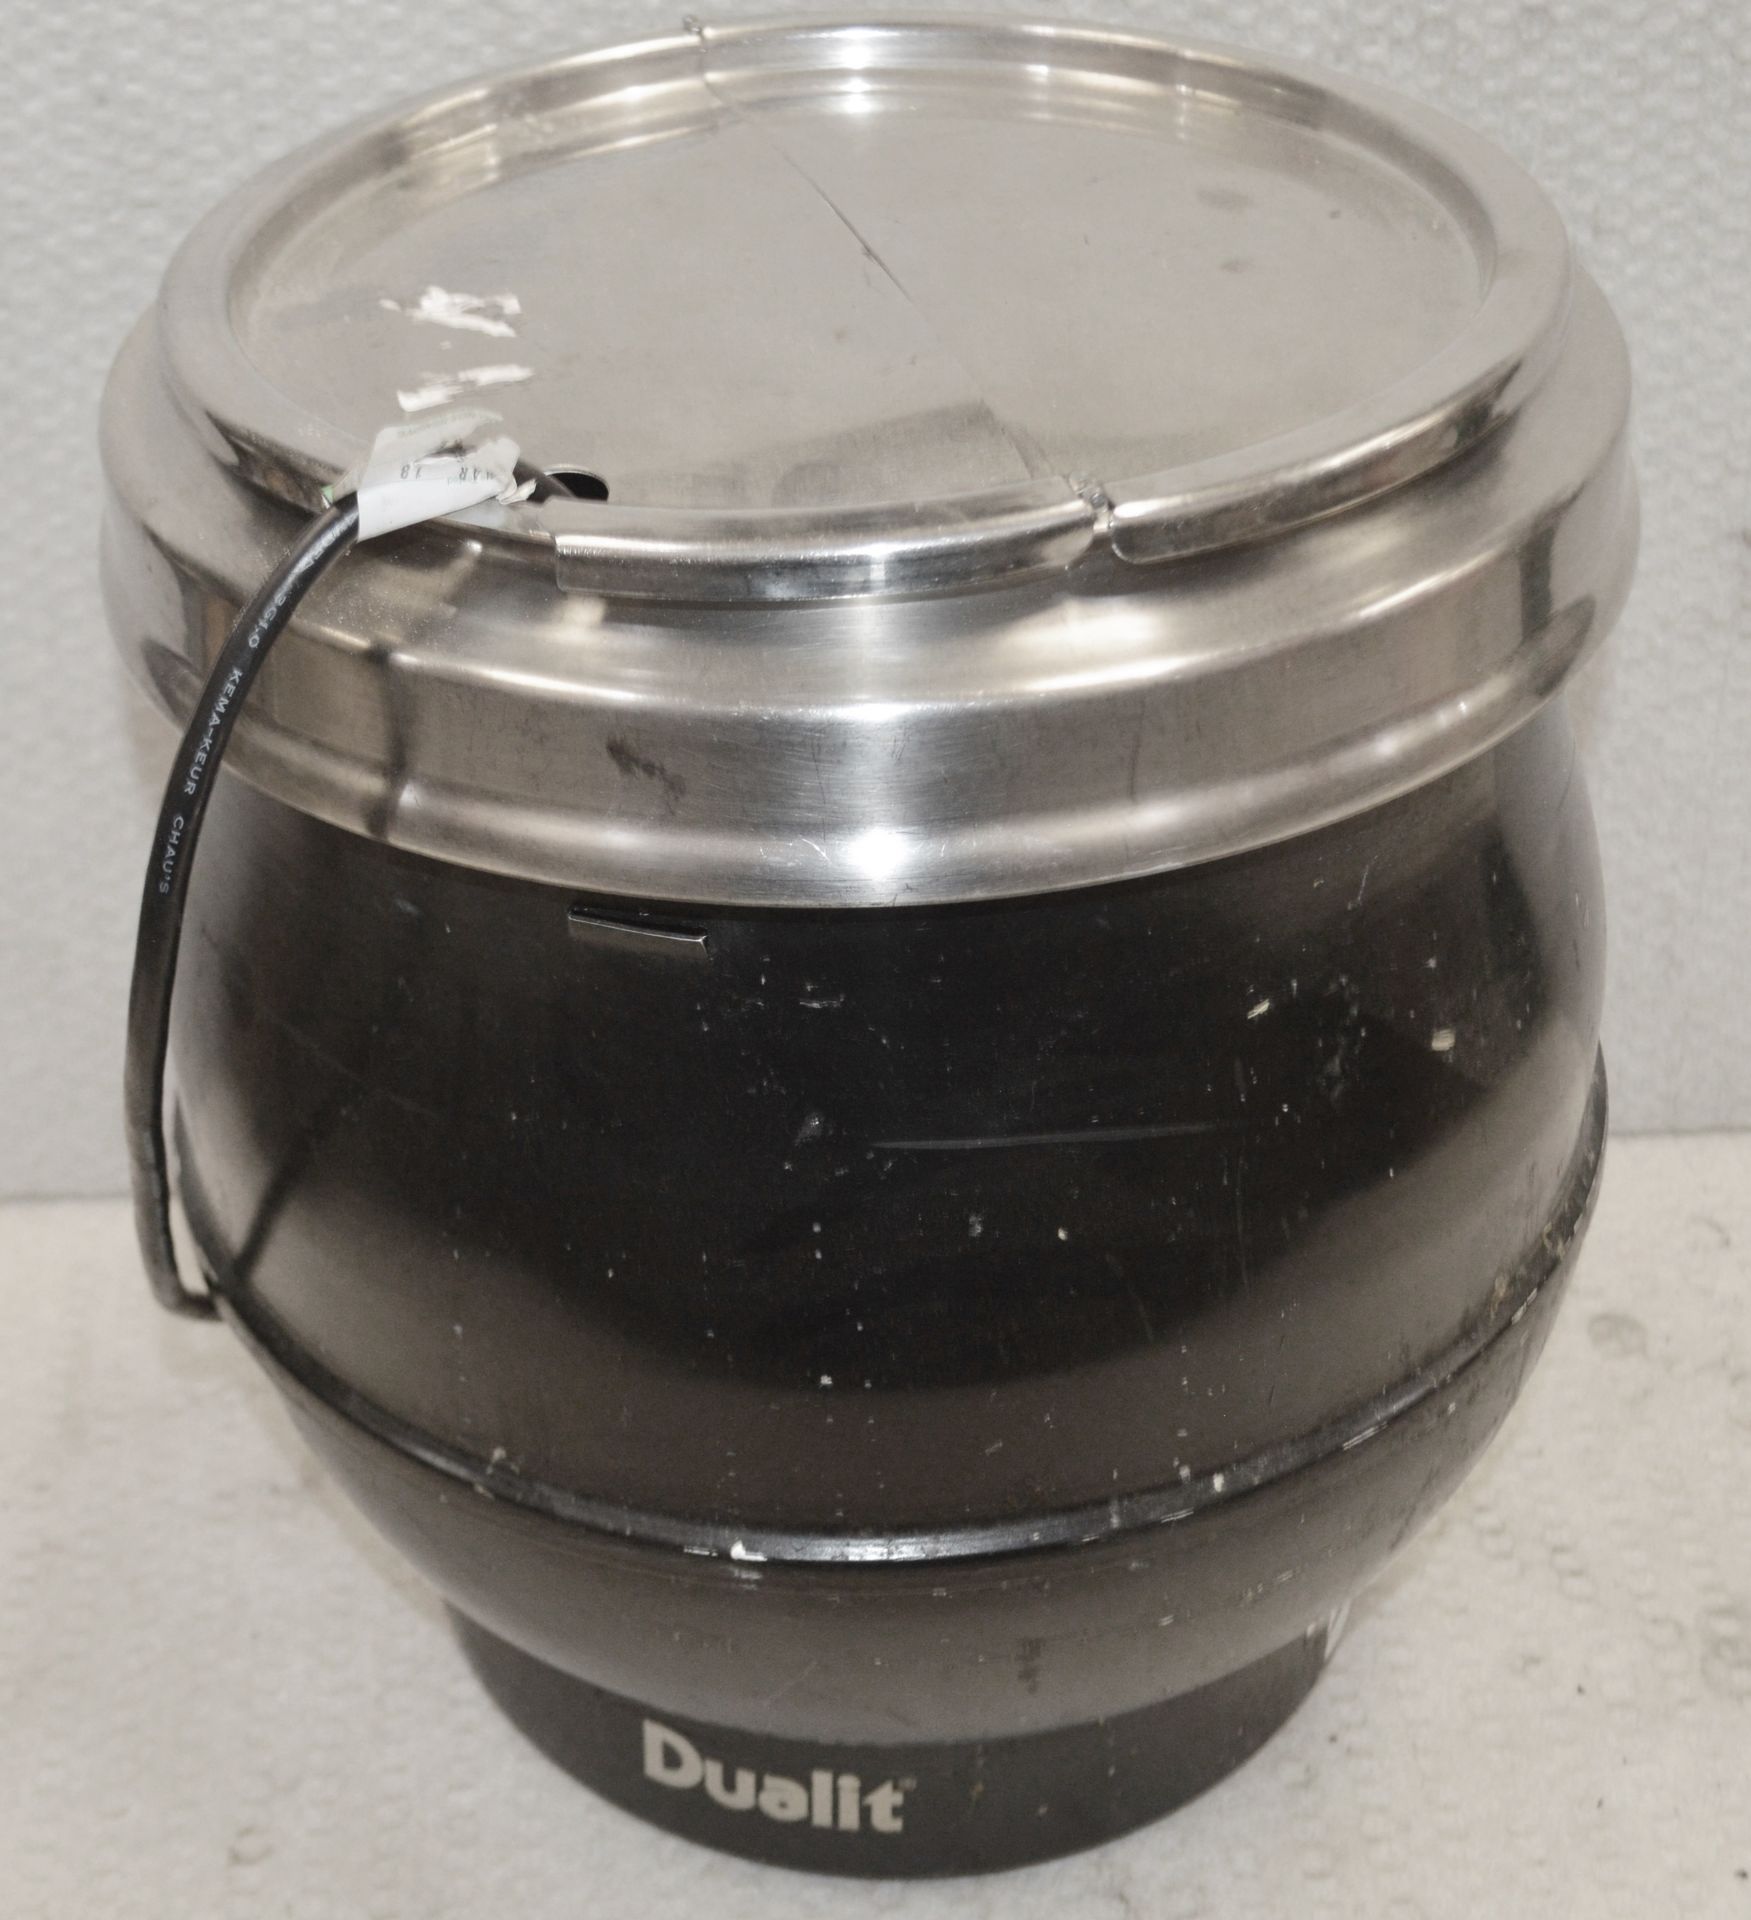 1 x Stainless Steel Dualit Hotpot/Soup Kettle - 11 litre capacity - Dimensions: H38 x W34 cm -